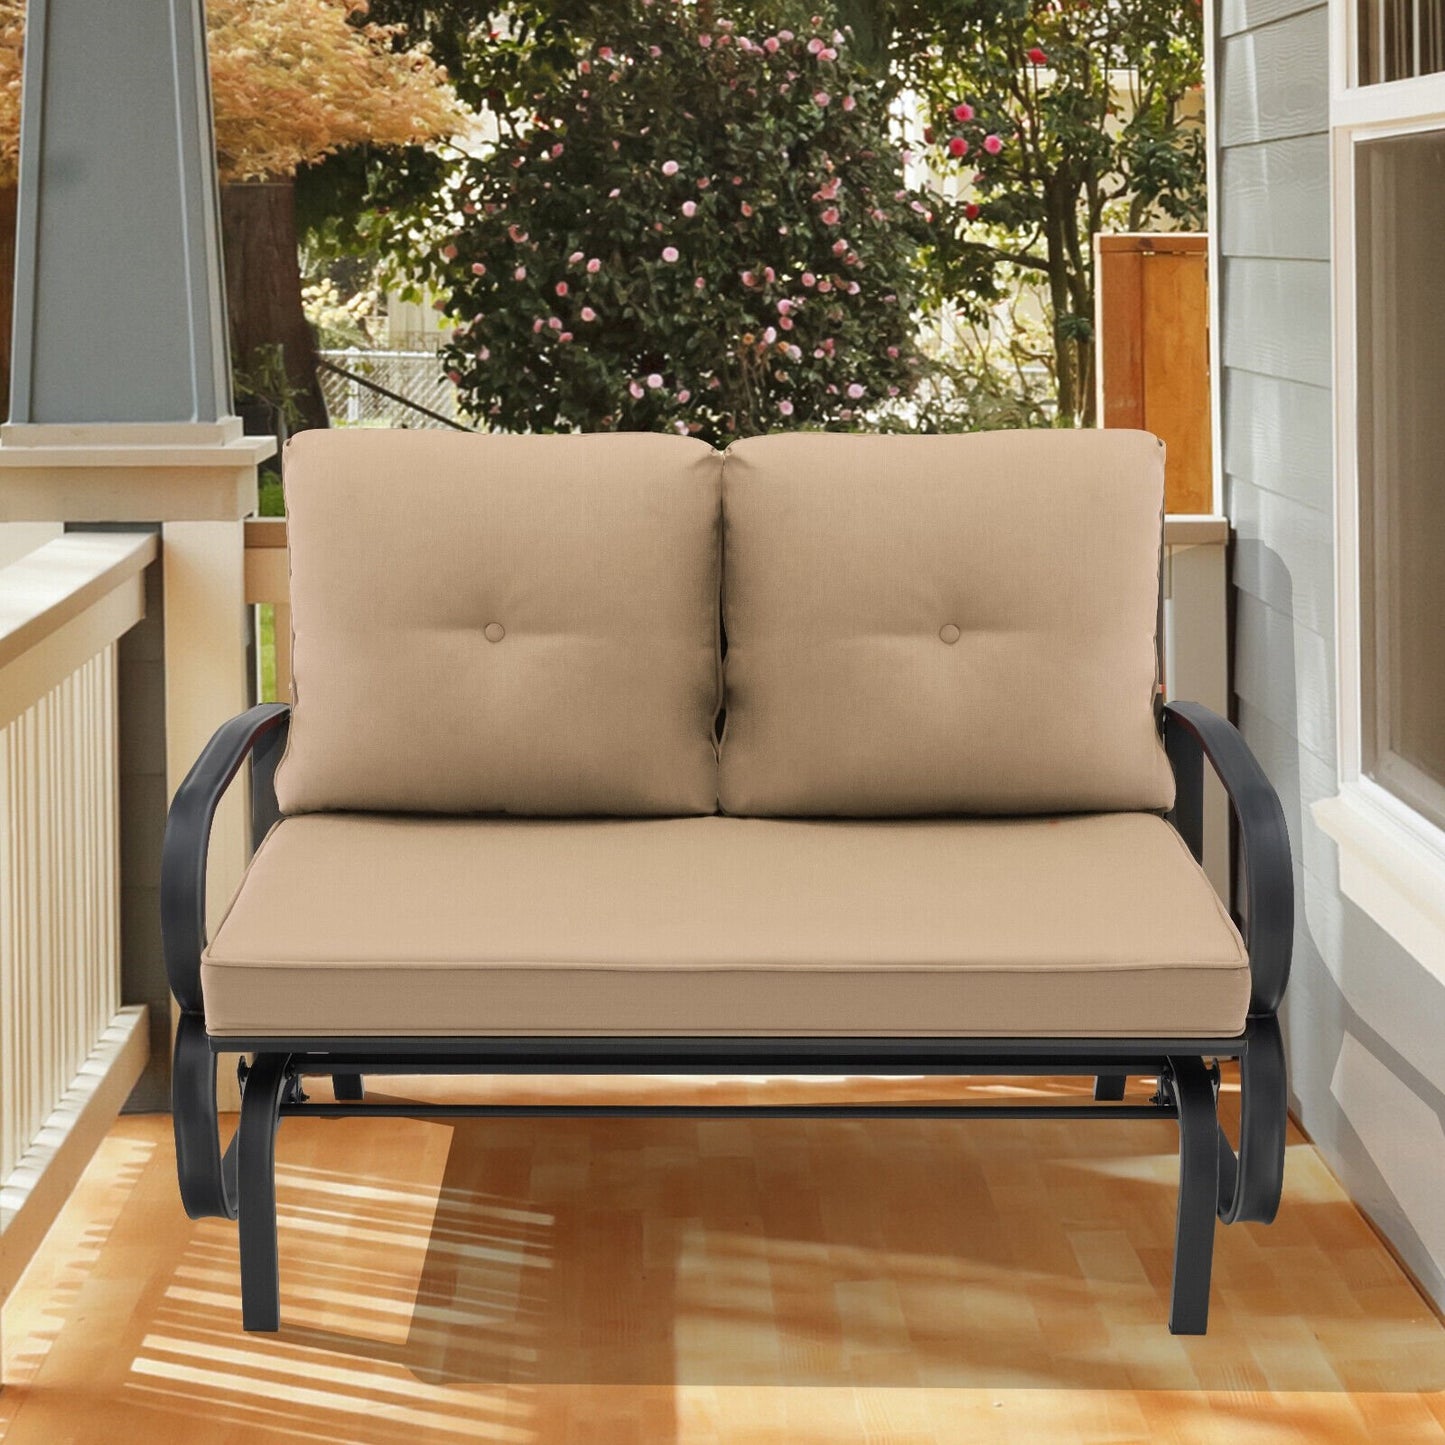 Patio 2-Person Glider Bench Rocking Loveseat Cushioned Armrest, Beige at Gallery Canada